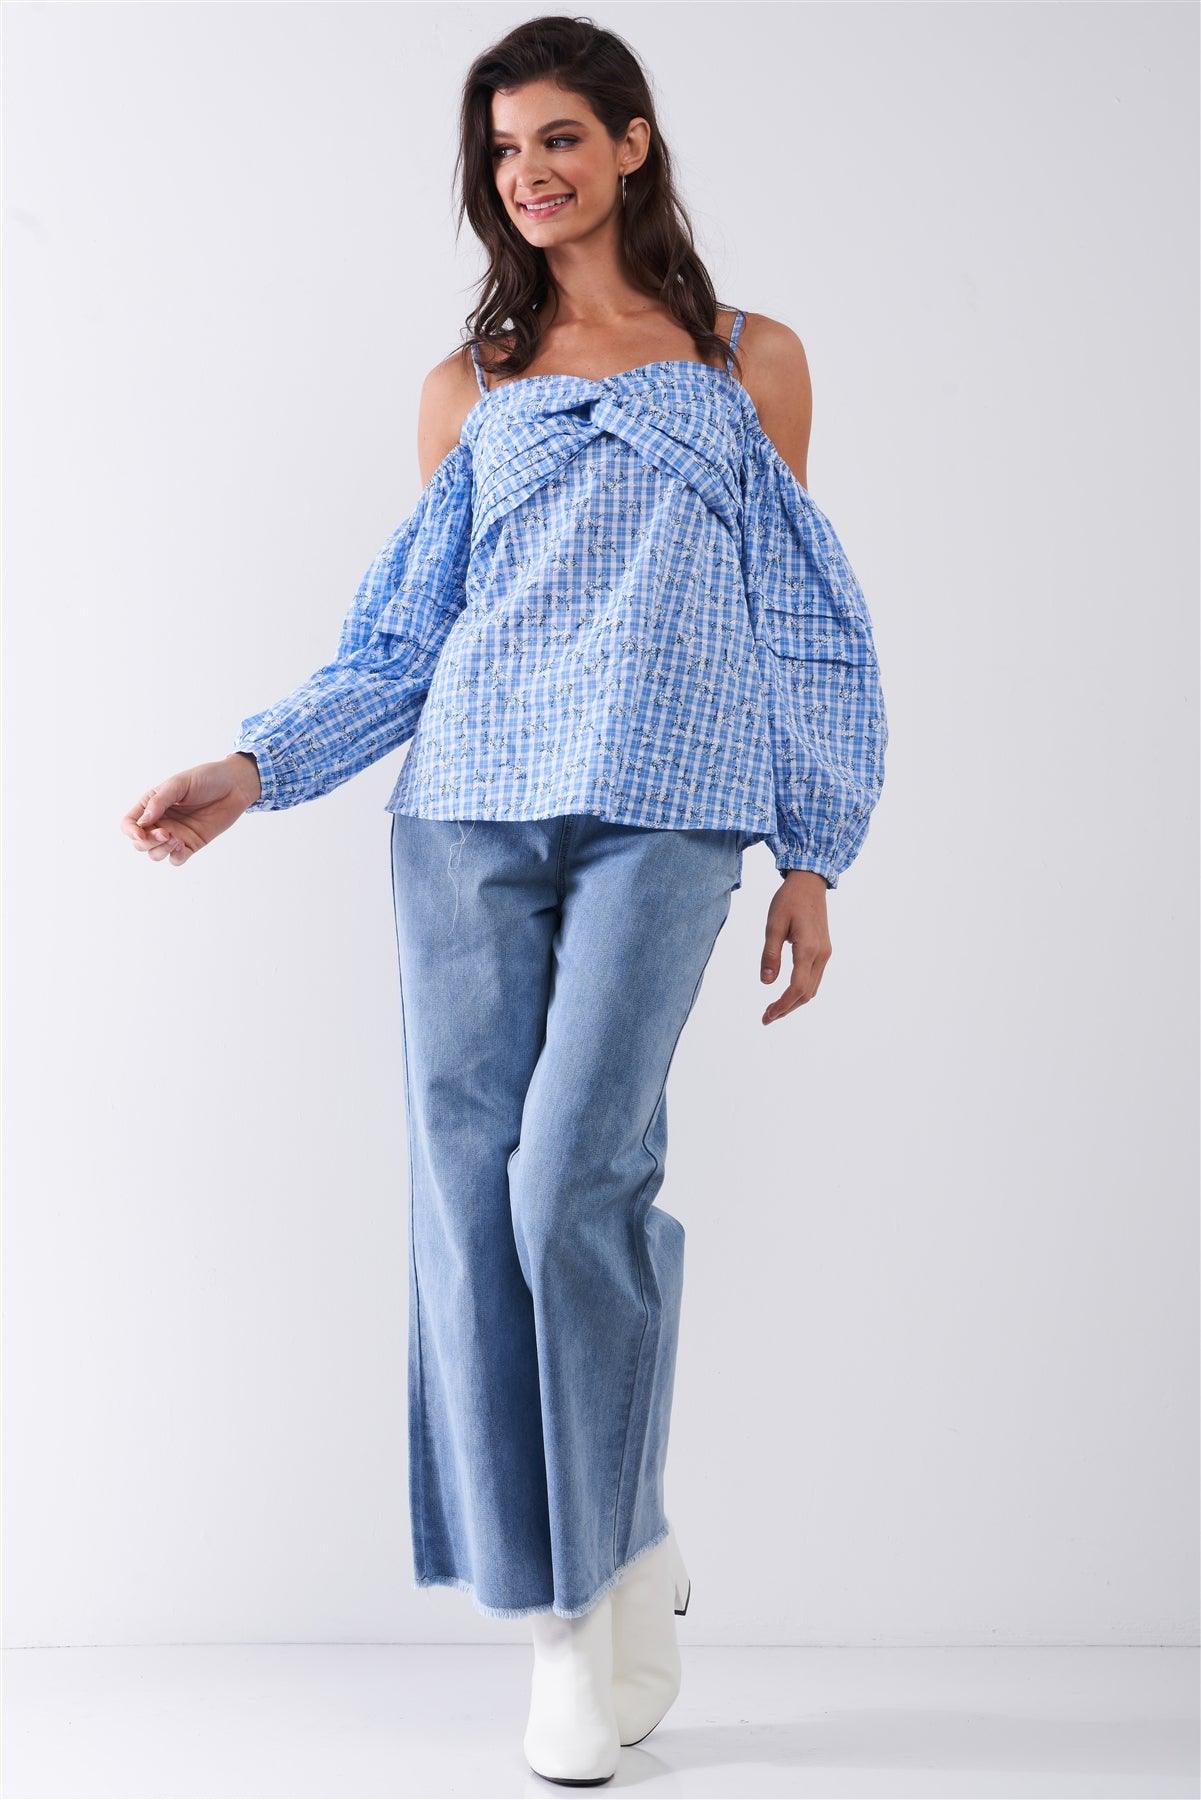 Blue & White Checkered Floral Print Off-The-Shoulder Balloon Sleeve Relaxed Blouse /1-2-1